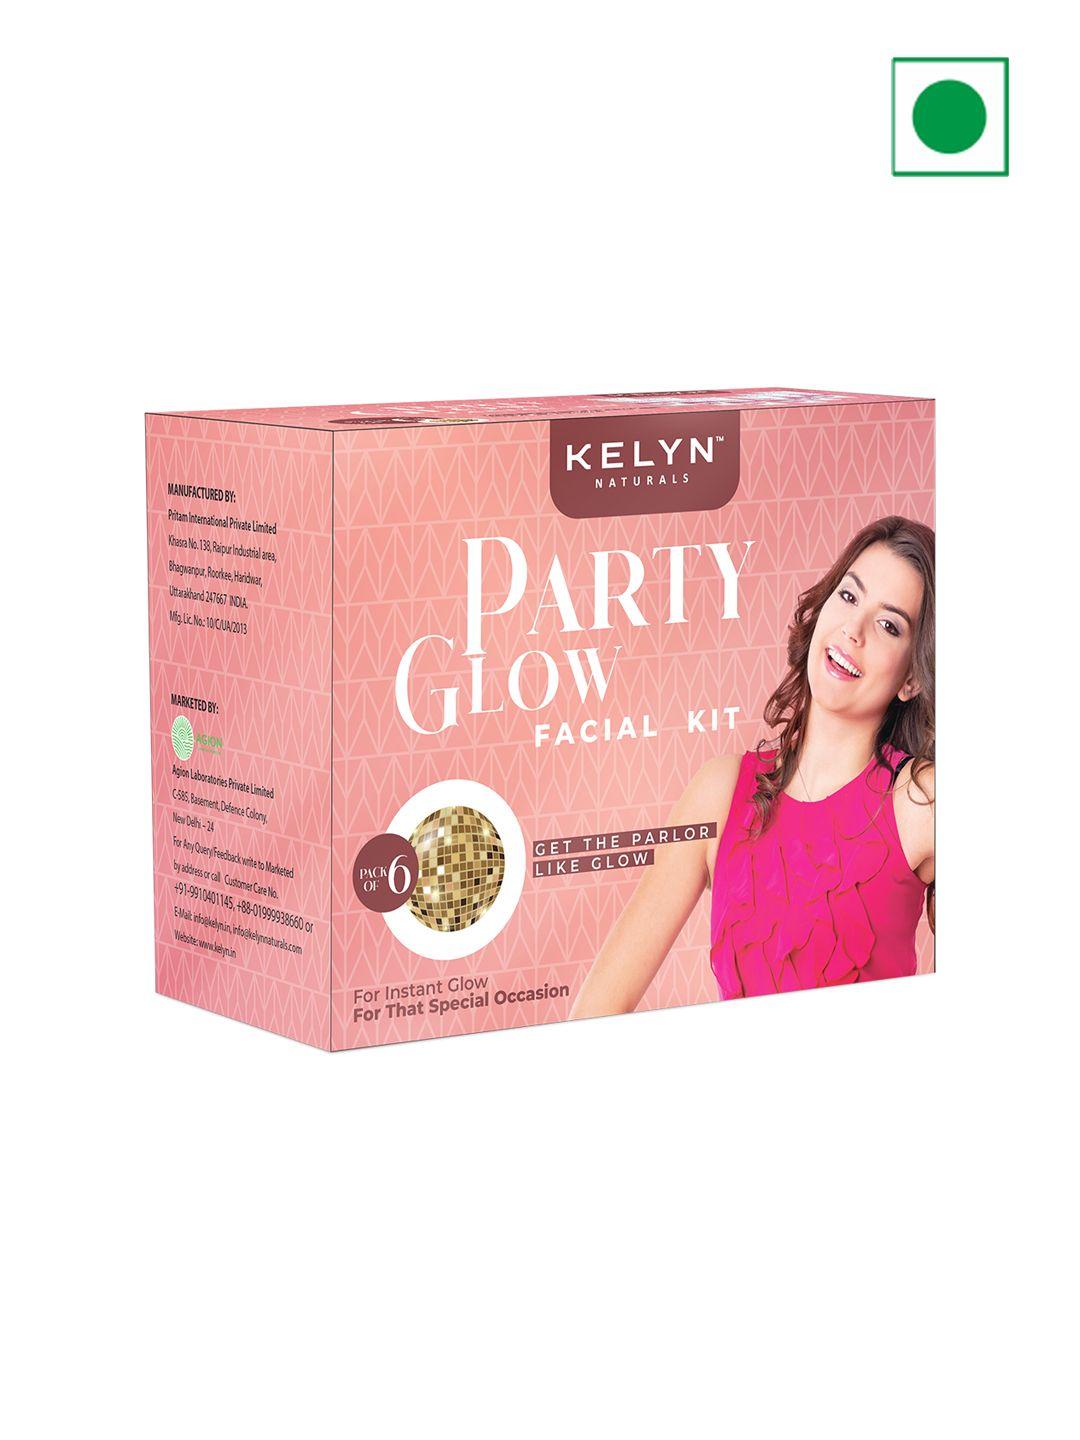 kelyn party facial kit for instant glow - 10g each